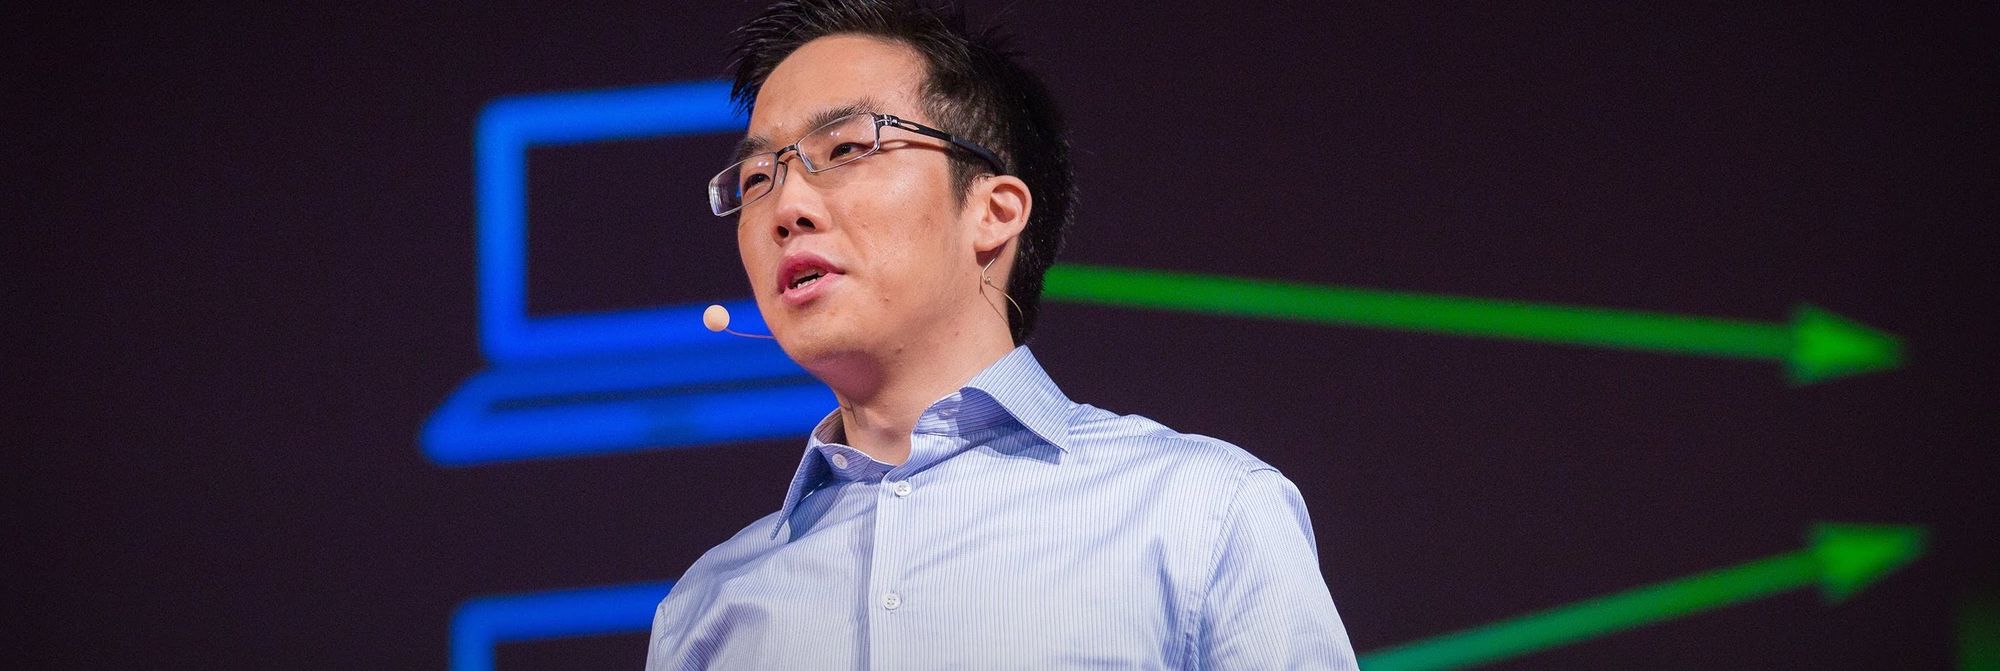 Encryption as the New Norm: Discussing A Changing Internet with ProtonMail Co-Founder Andy Yen